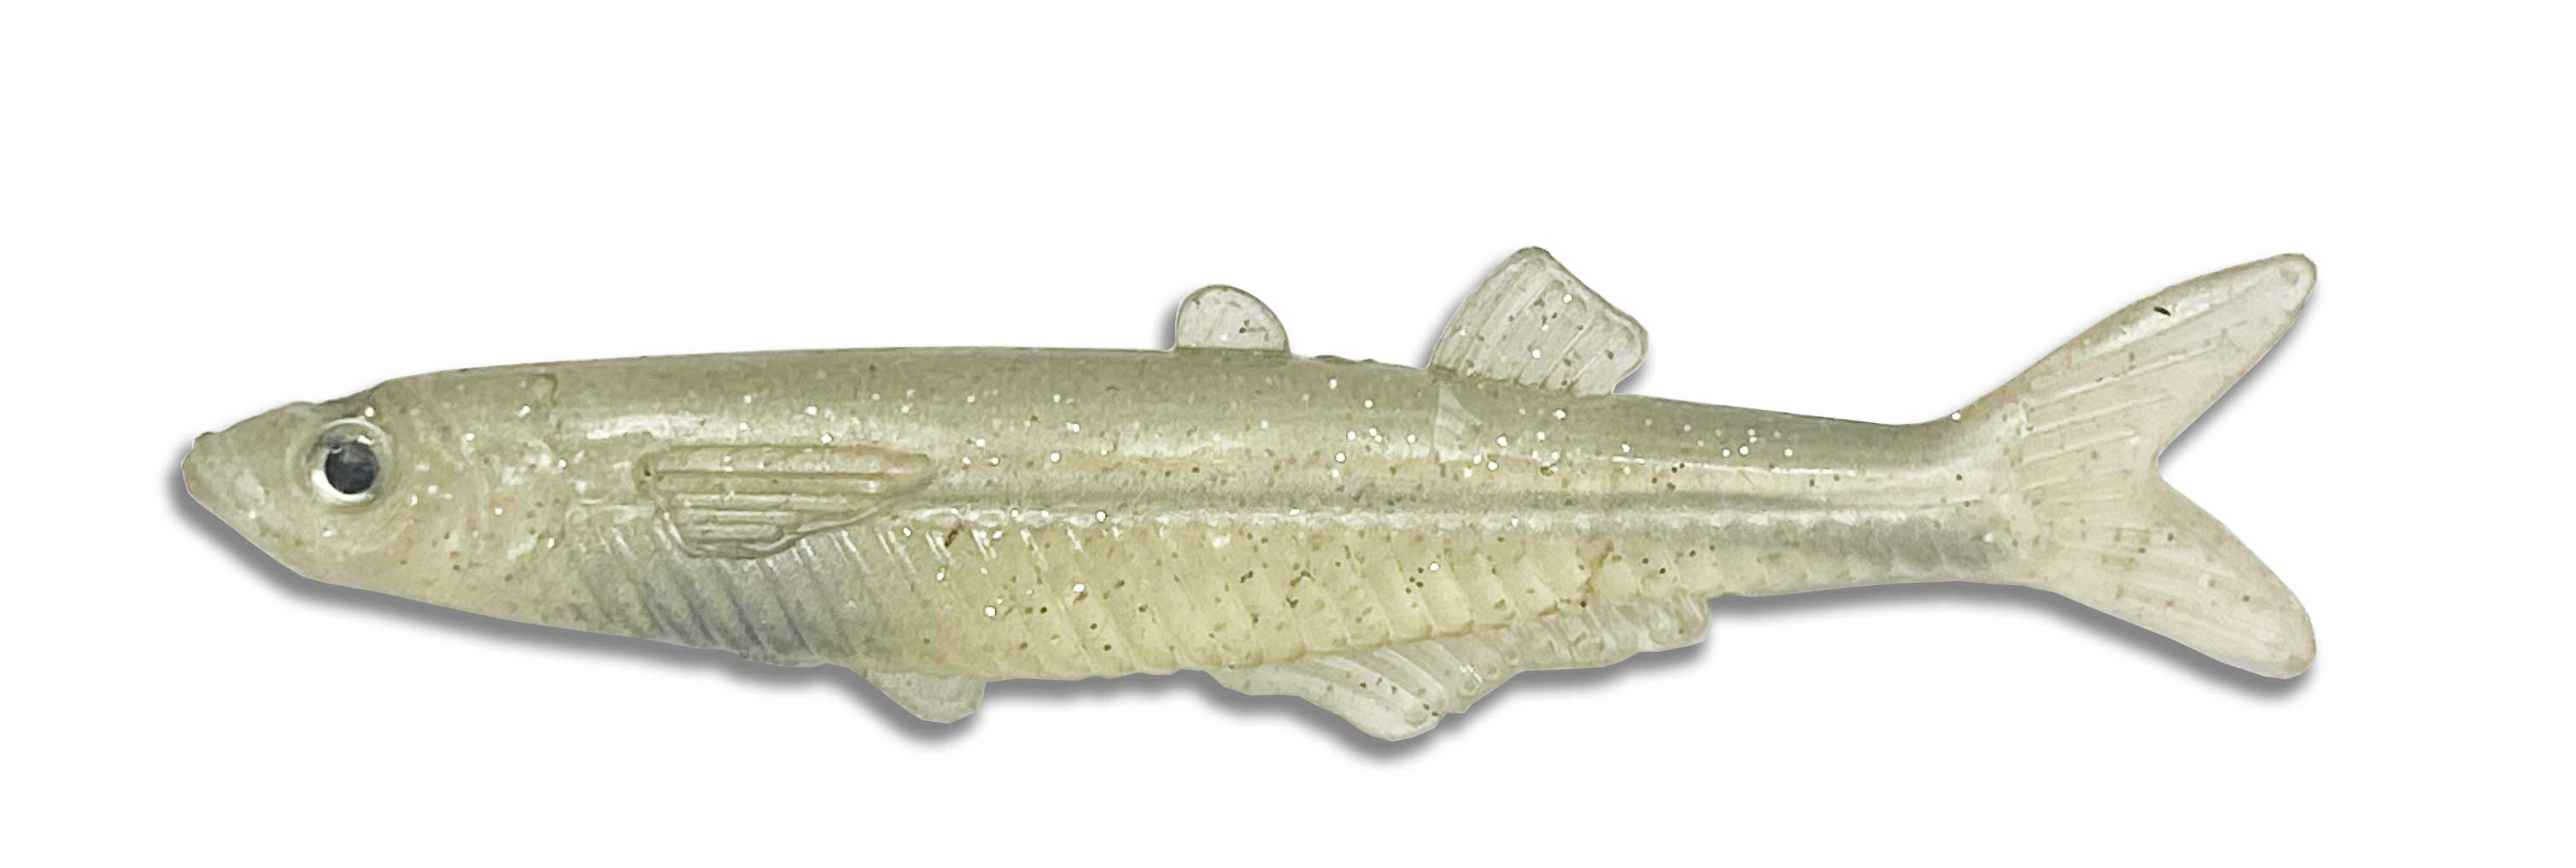 Almost Alive 2.75 Soft Glass Minnow Lures 6 Pack Silver Artificial Glass  Minnow Silver Flake 2.75 6 Pack [AAGM275] - $2.59 : Almost Alive Lures,  The best there ever was.